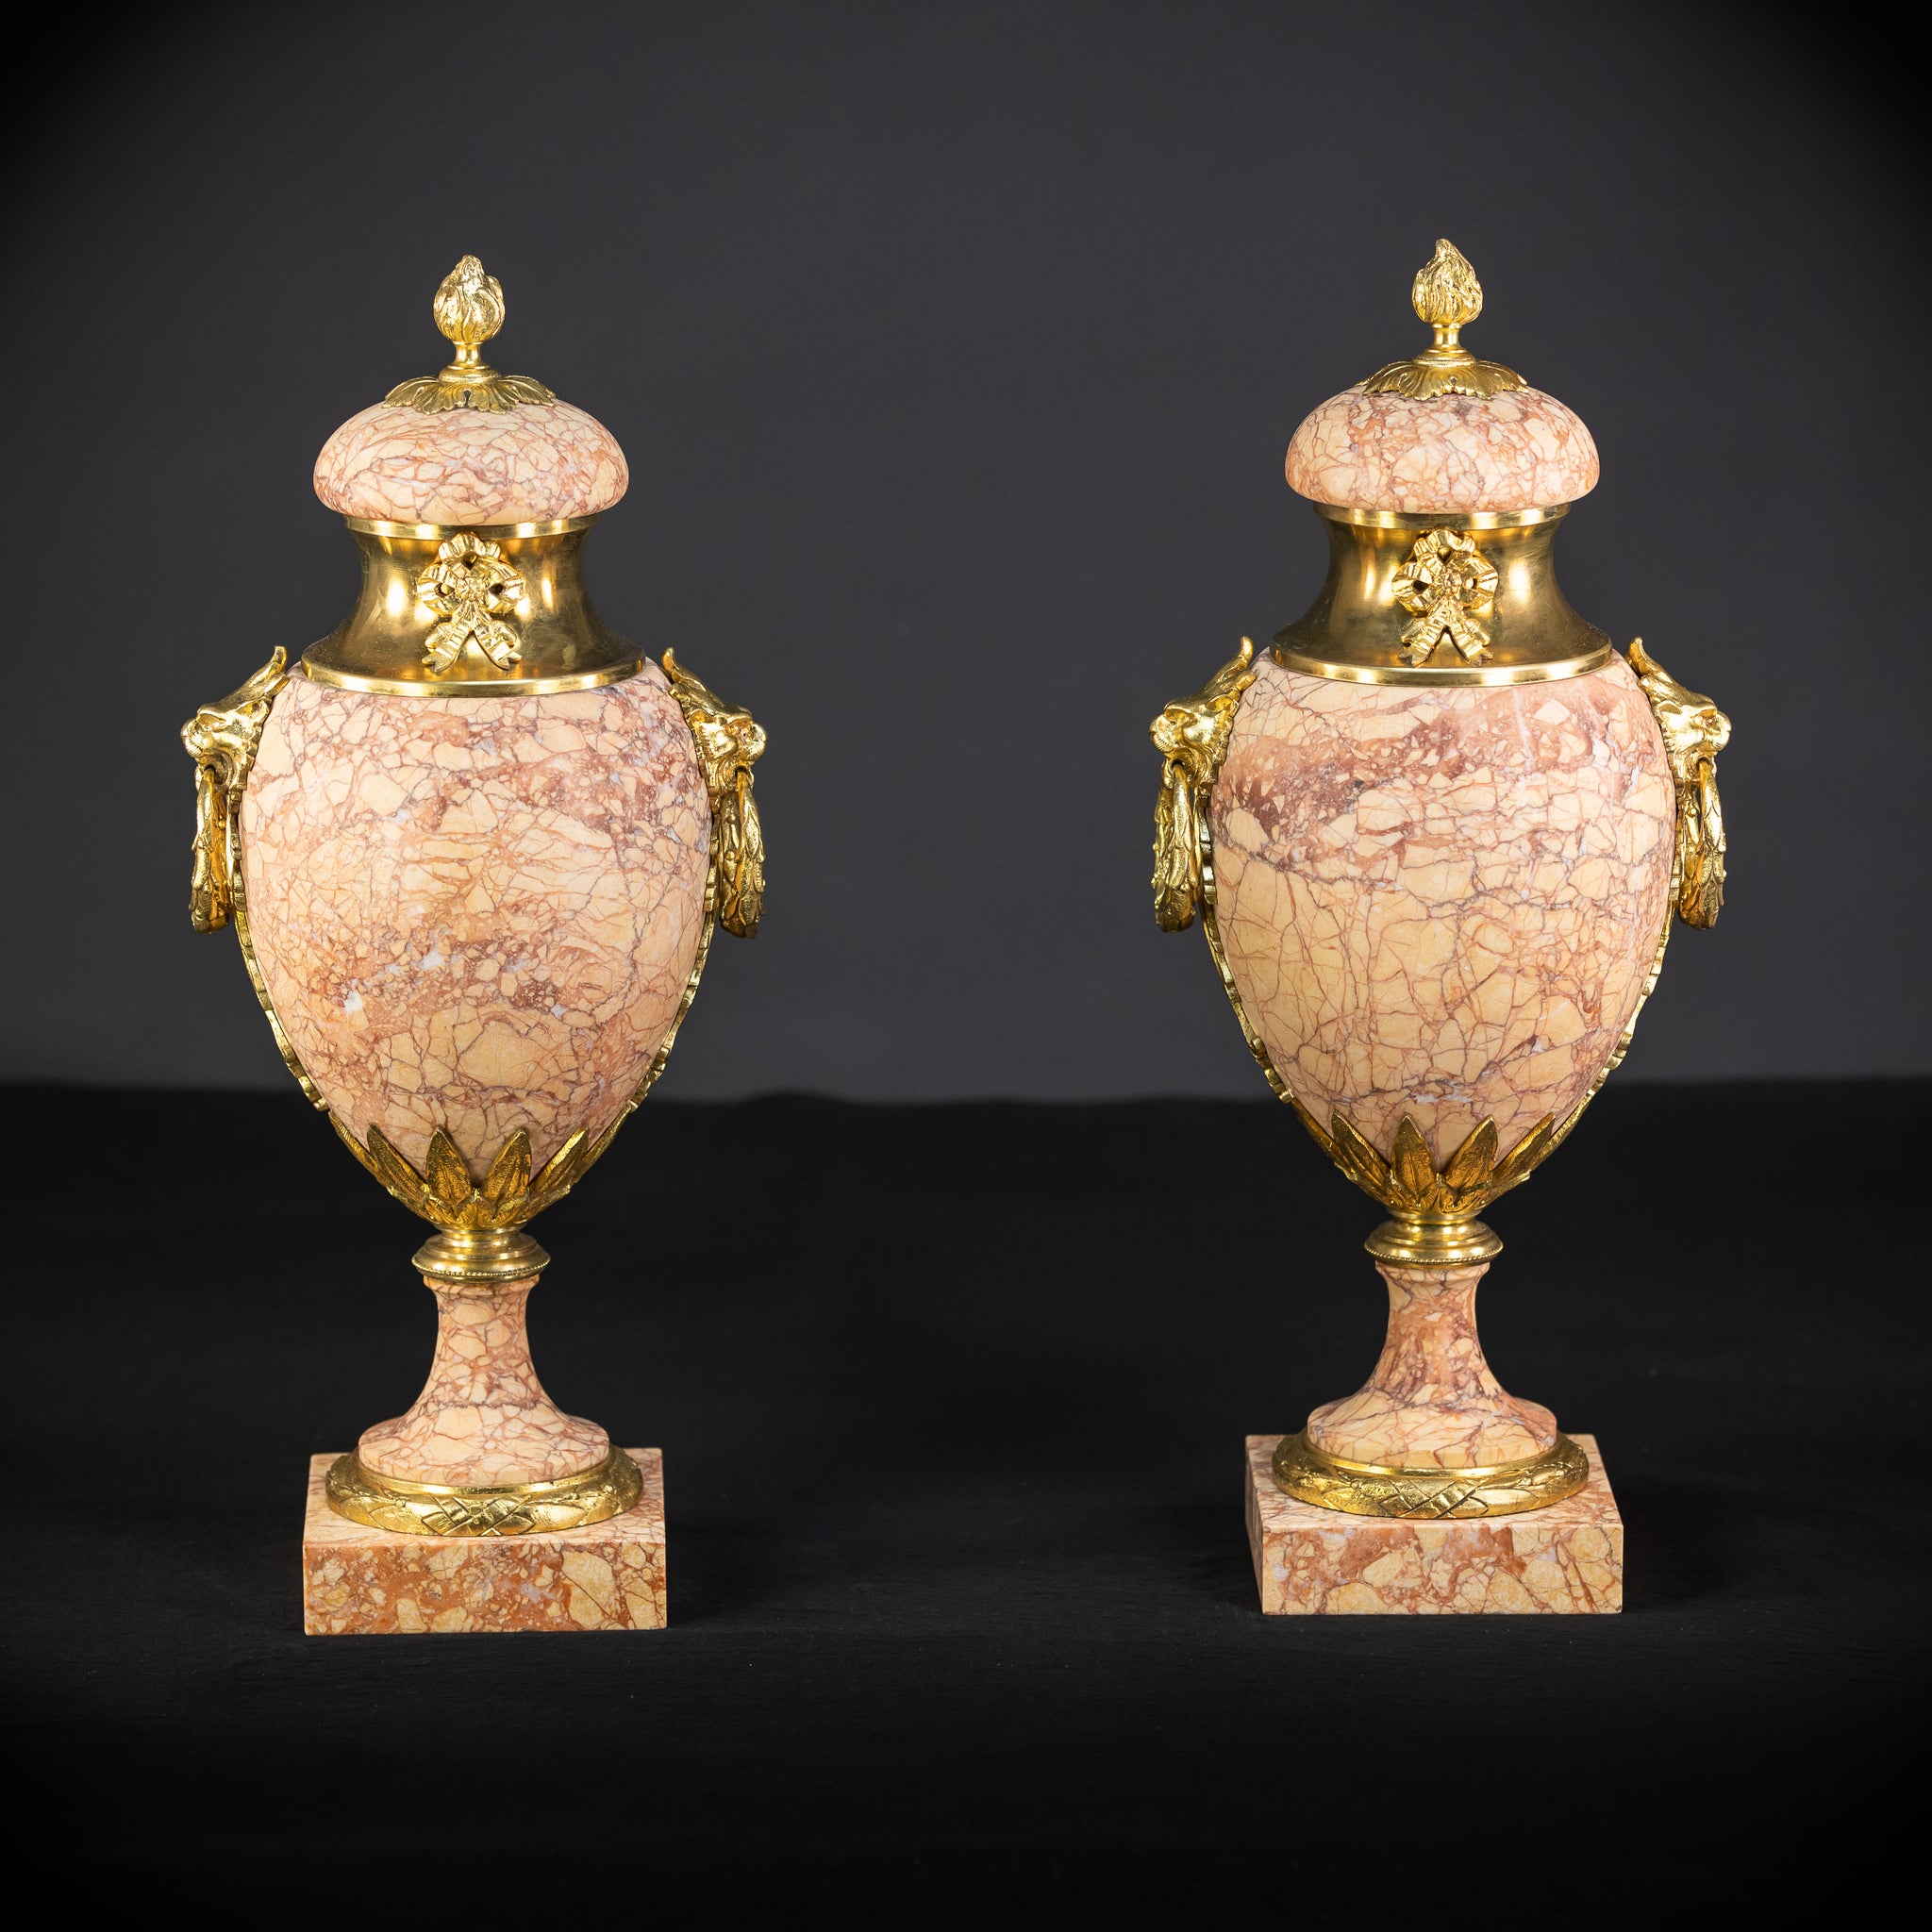 Pair of Marble and Bronze Urns | 1800s Antique | 17.7" / 45 cm